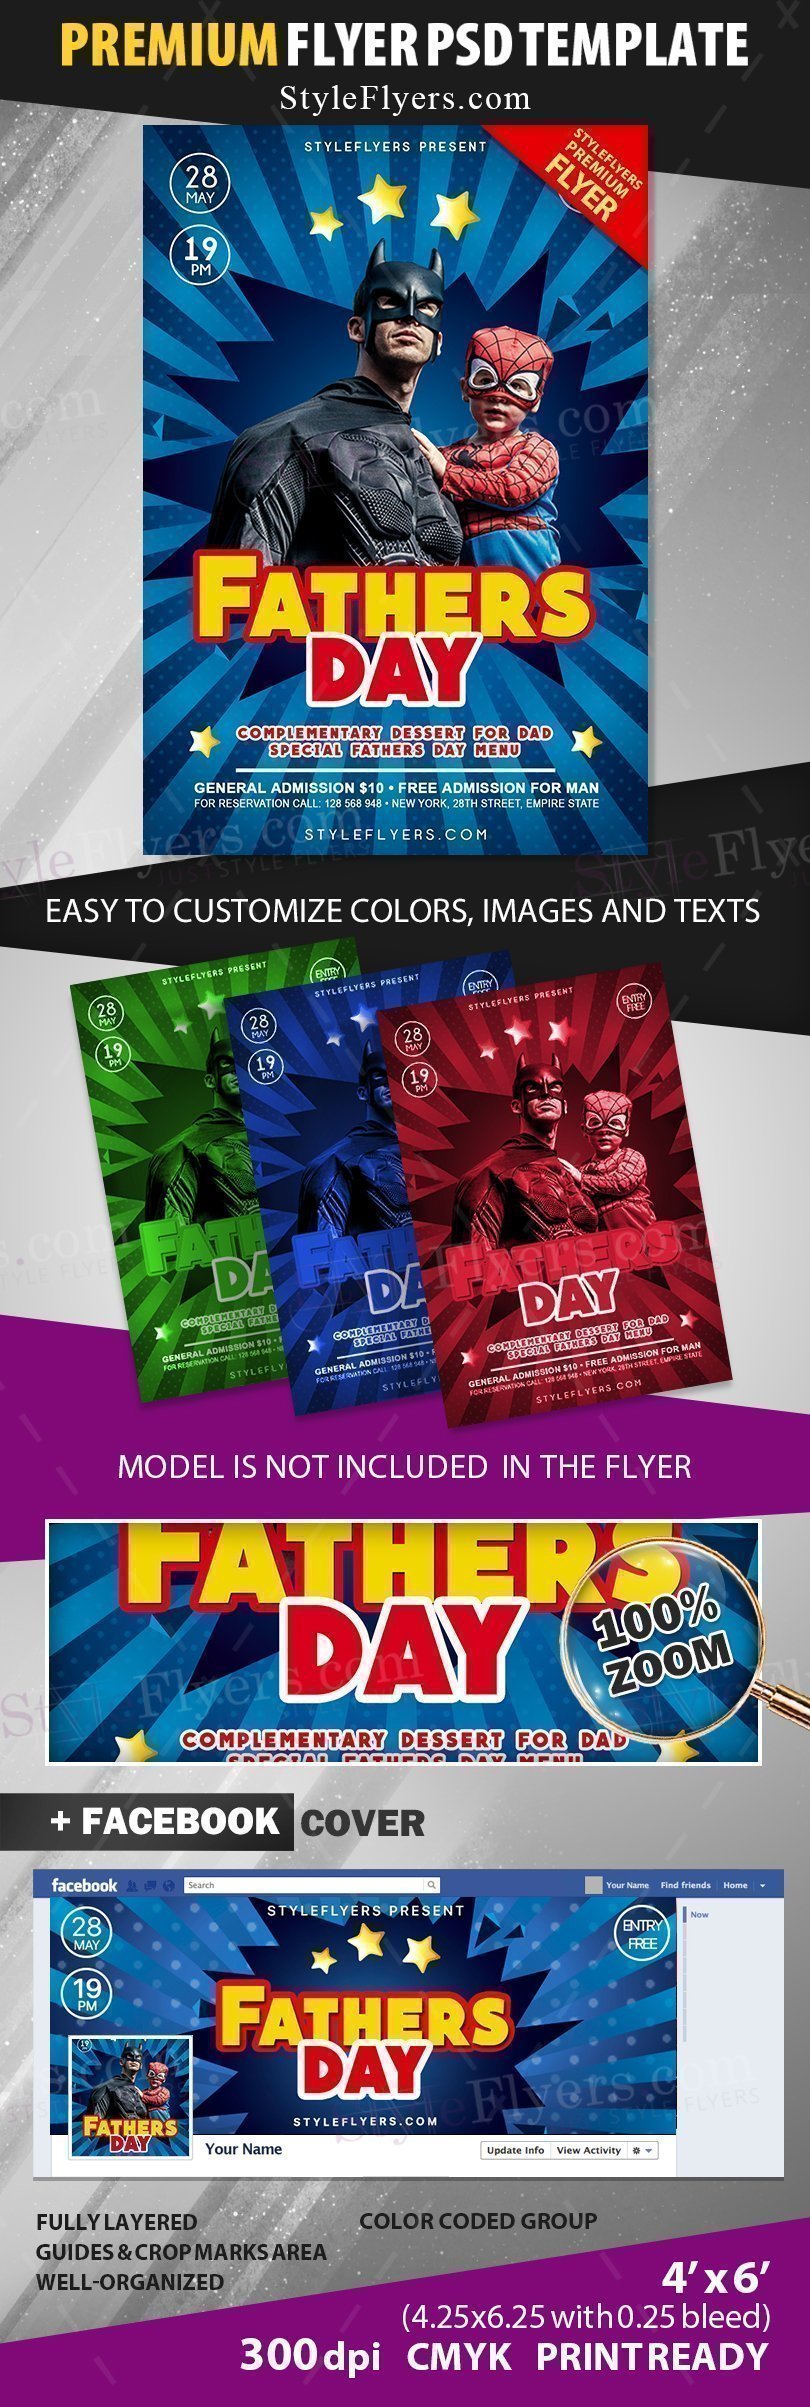 preview_fathers day_psd_flyer